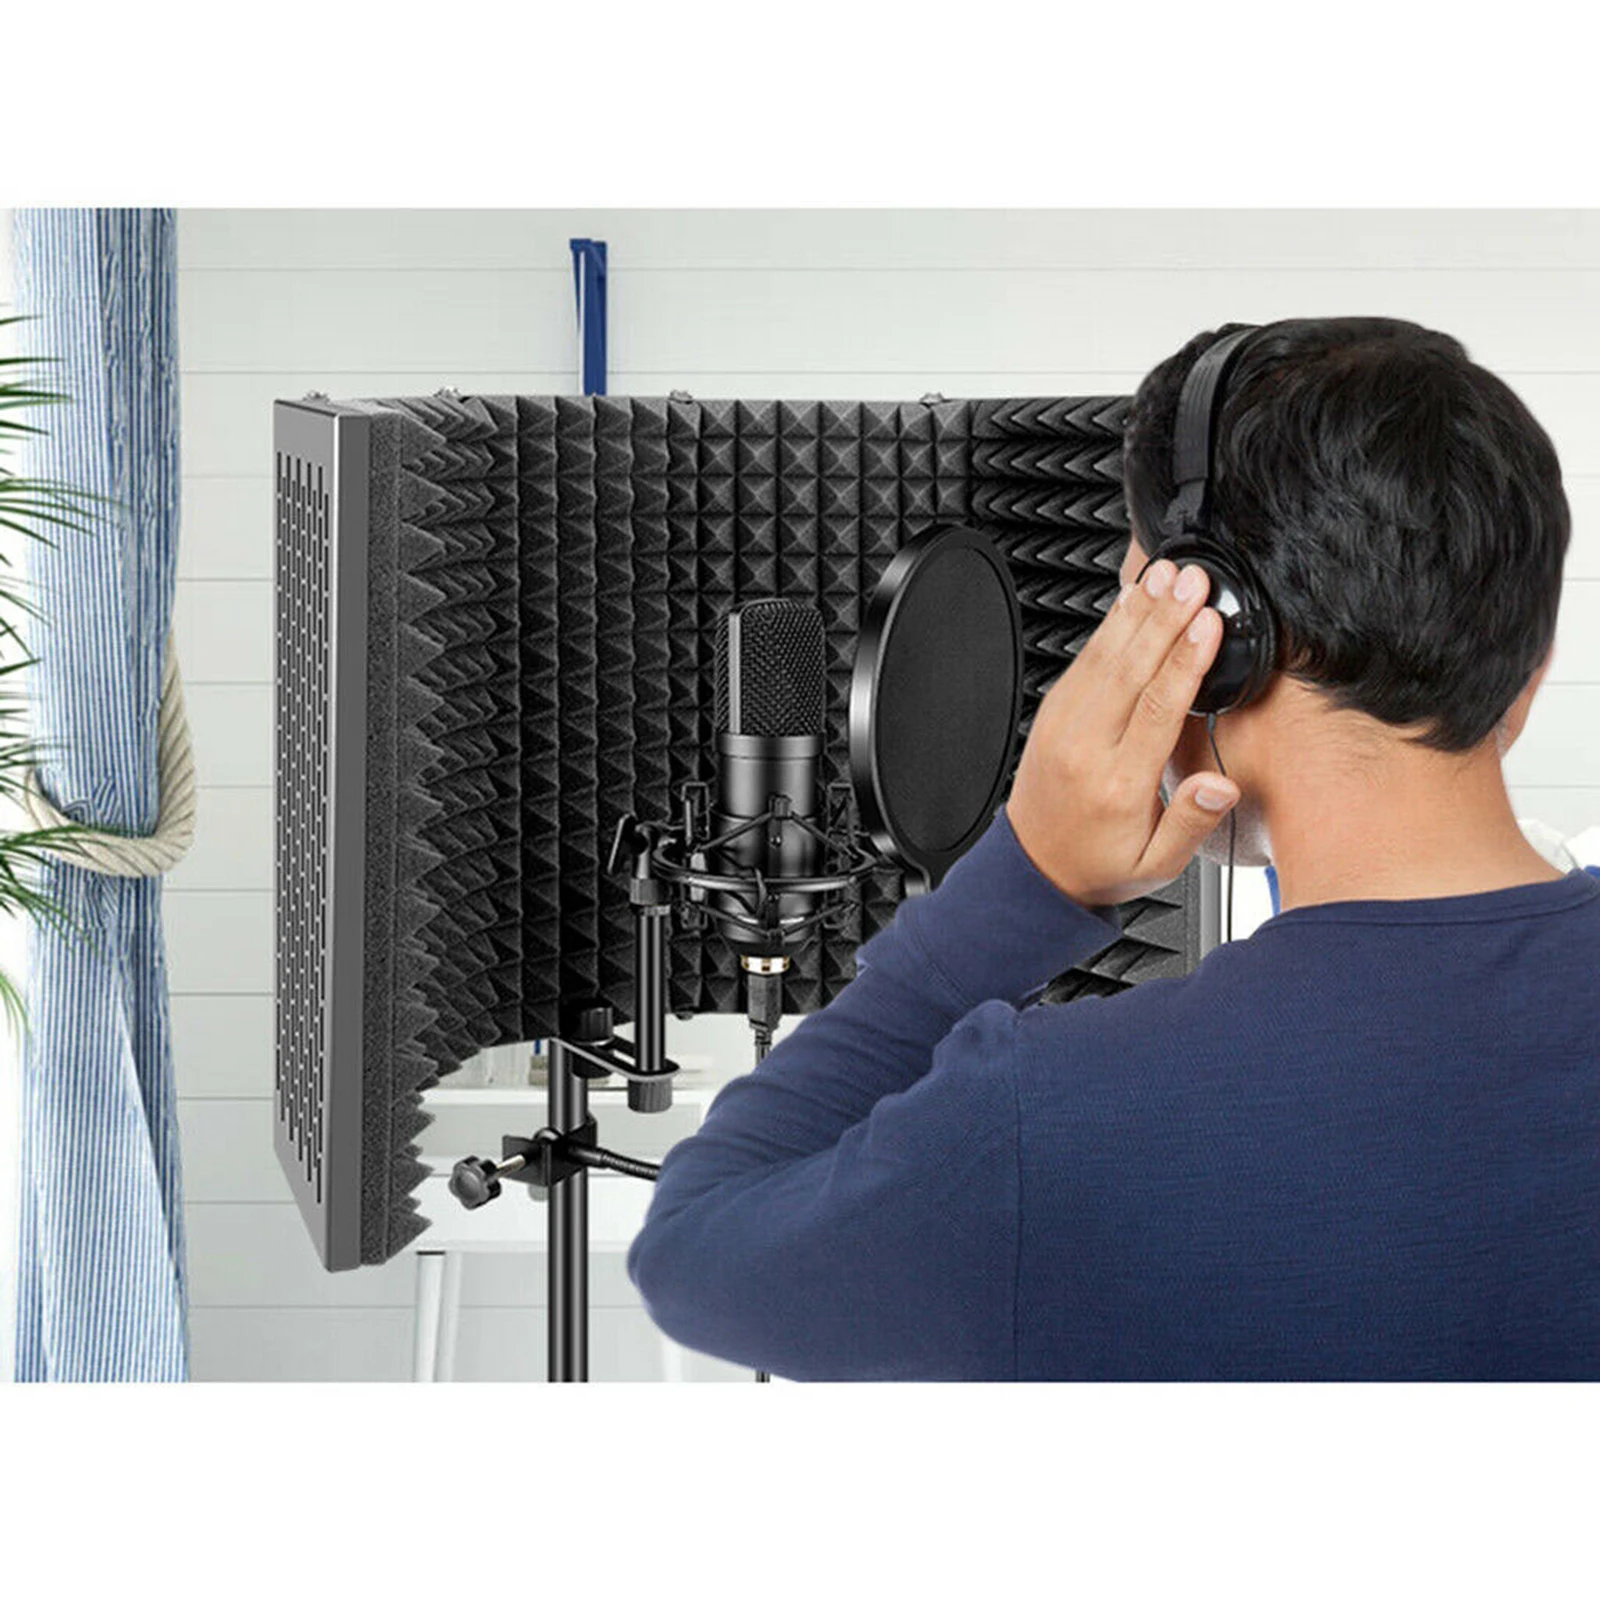 Adjustable 5 Panel Microphone Isolation Shield Vocal Booth Foldable Studio Microphone Shield for Recording Sound Broadcast